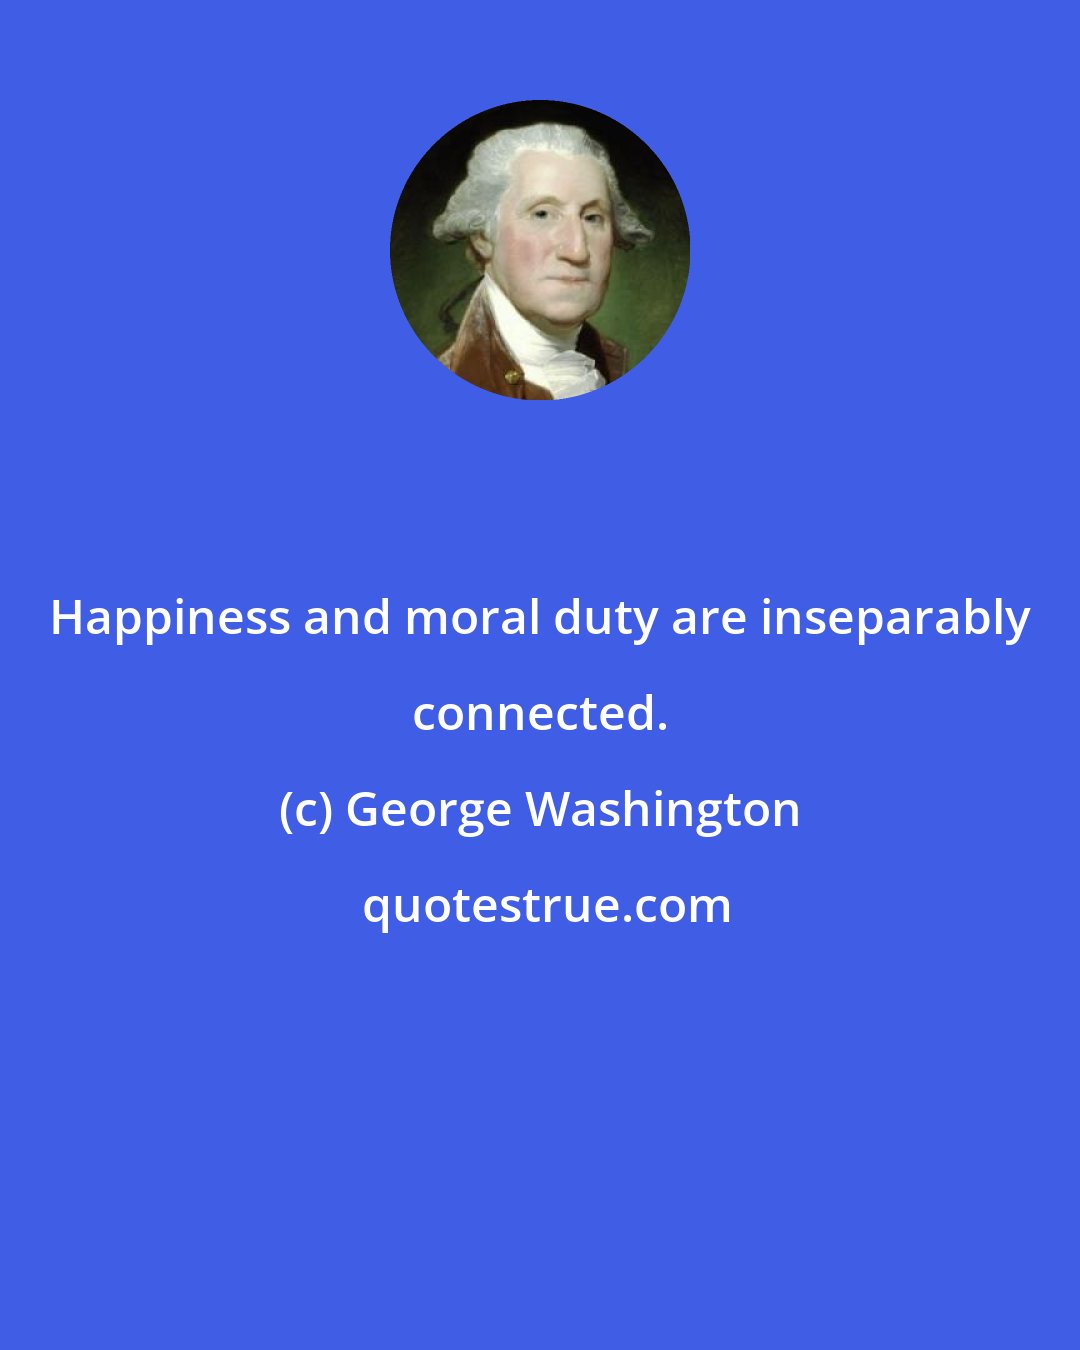 George Washington: Happiness and moral duty are inseparably connected.